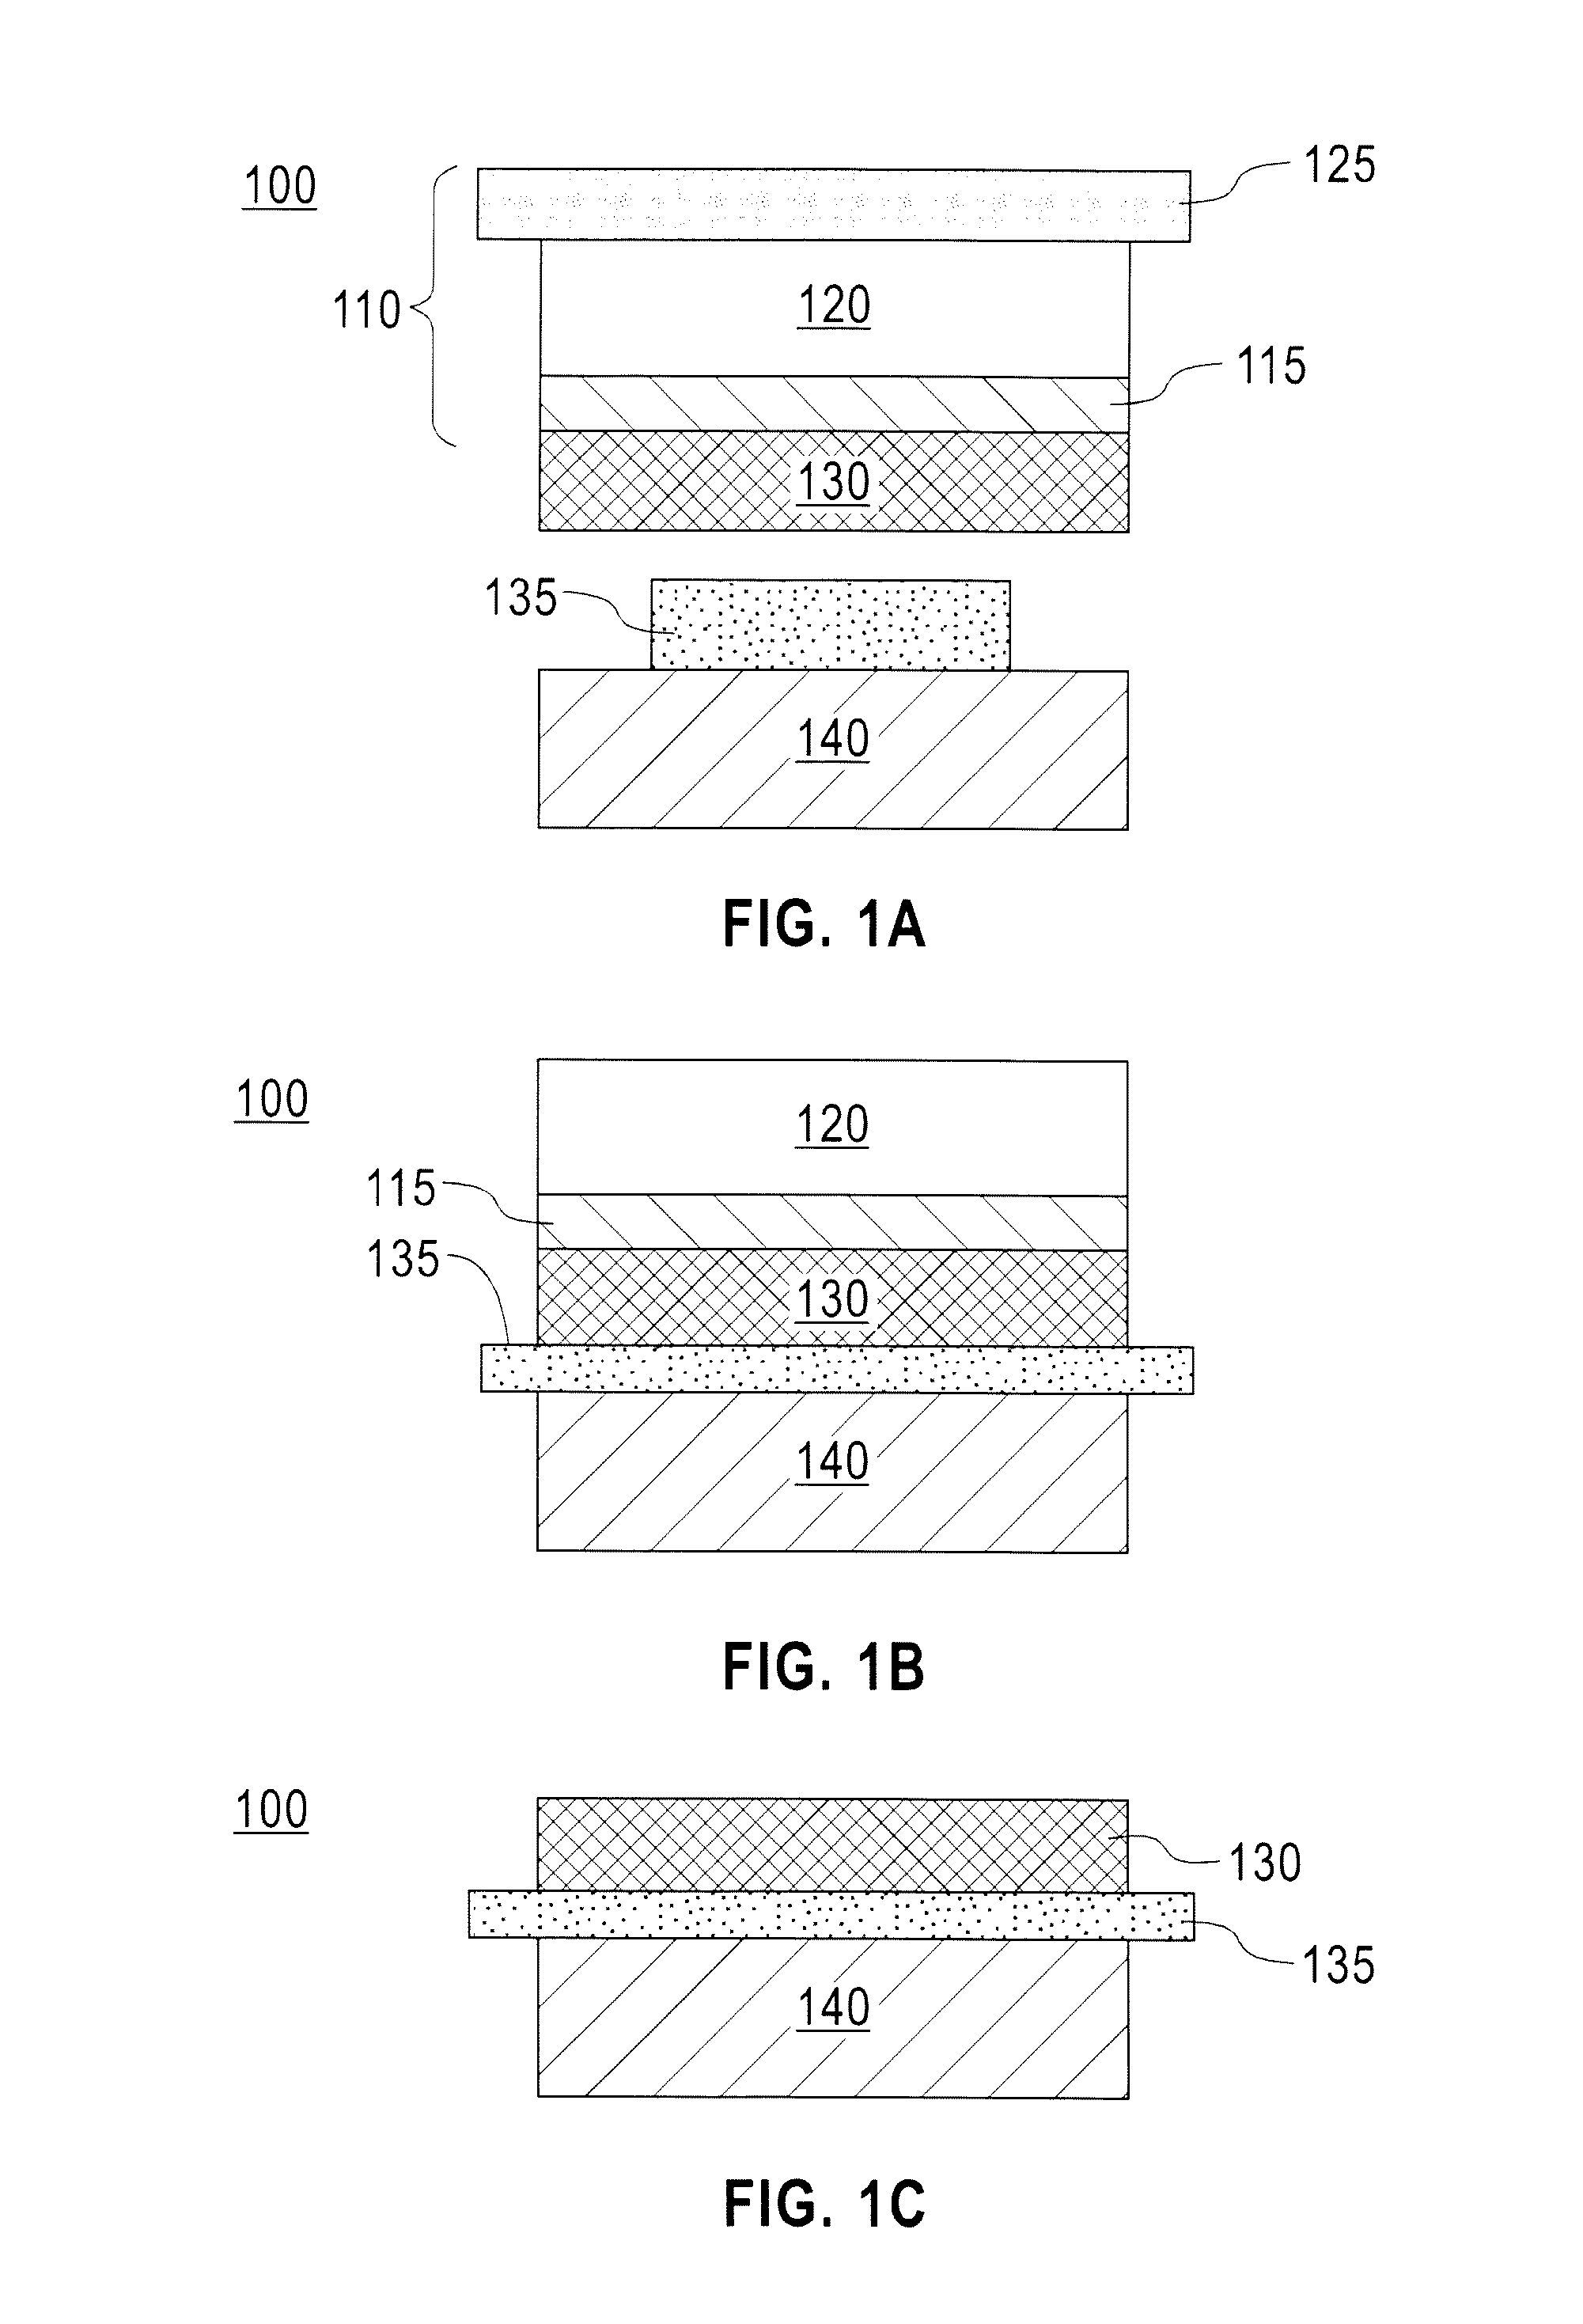 Method of forming a flexible semiconductor layer and devices on a flexible carrier